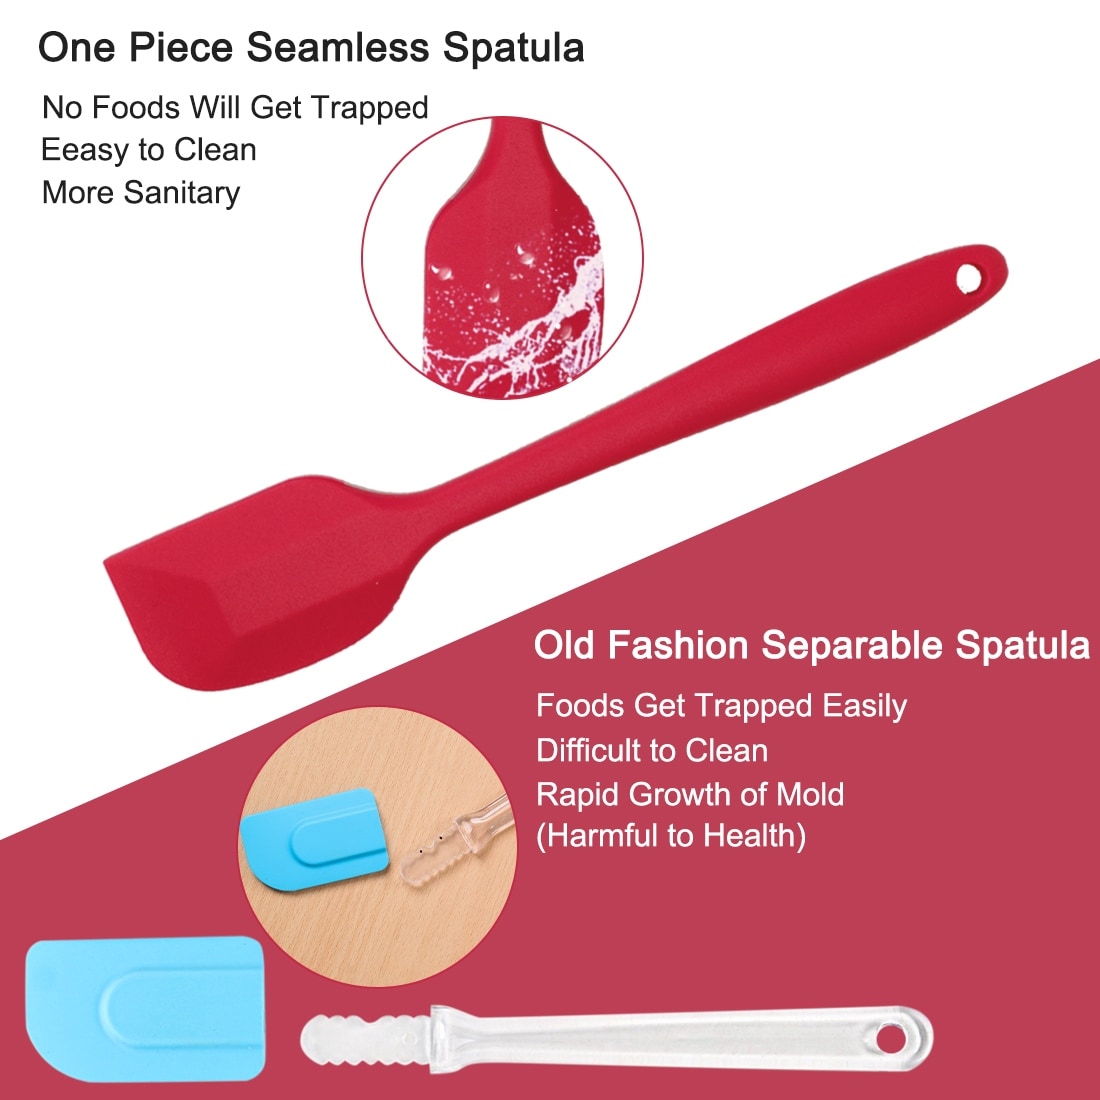 BIWHALE silicone spatula set, heat resistant kitchen spatulas for non-stick  cooking and baking, seamless one piece design, flexible s